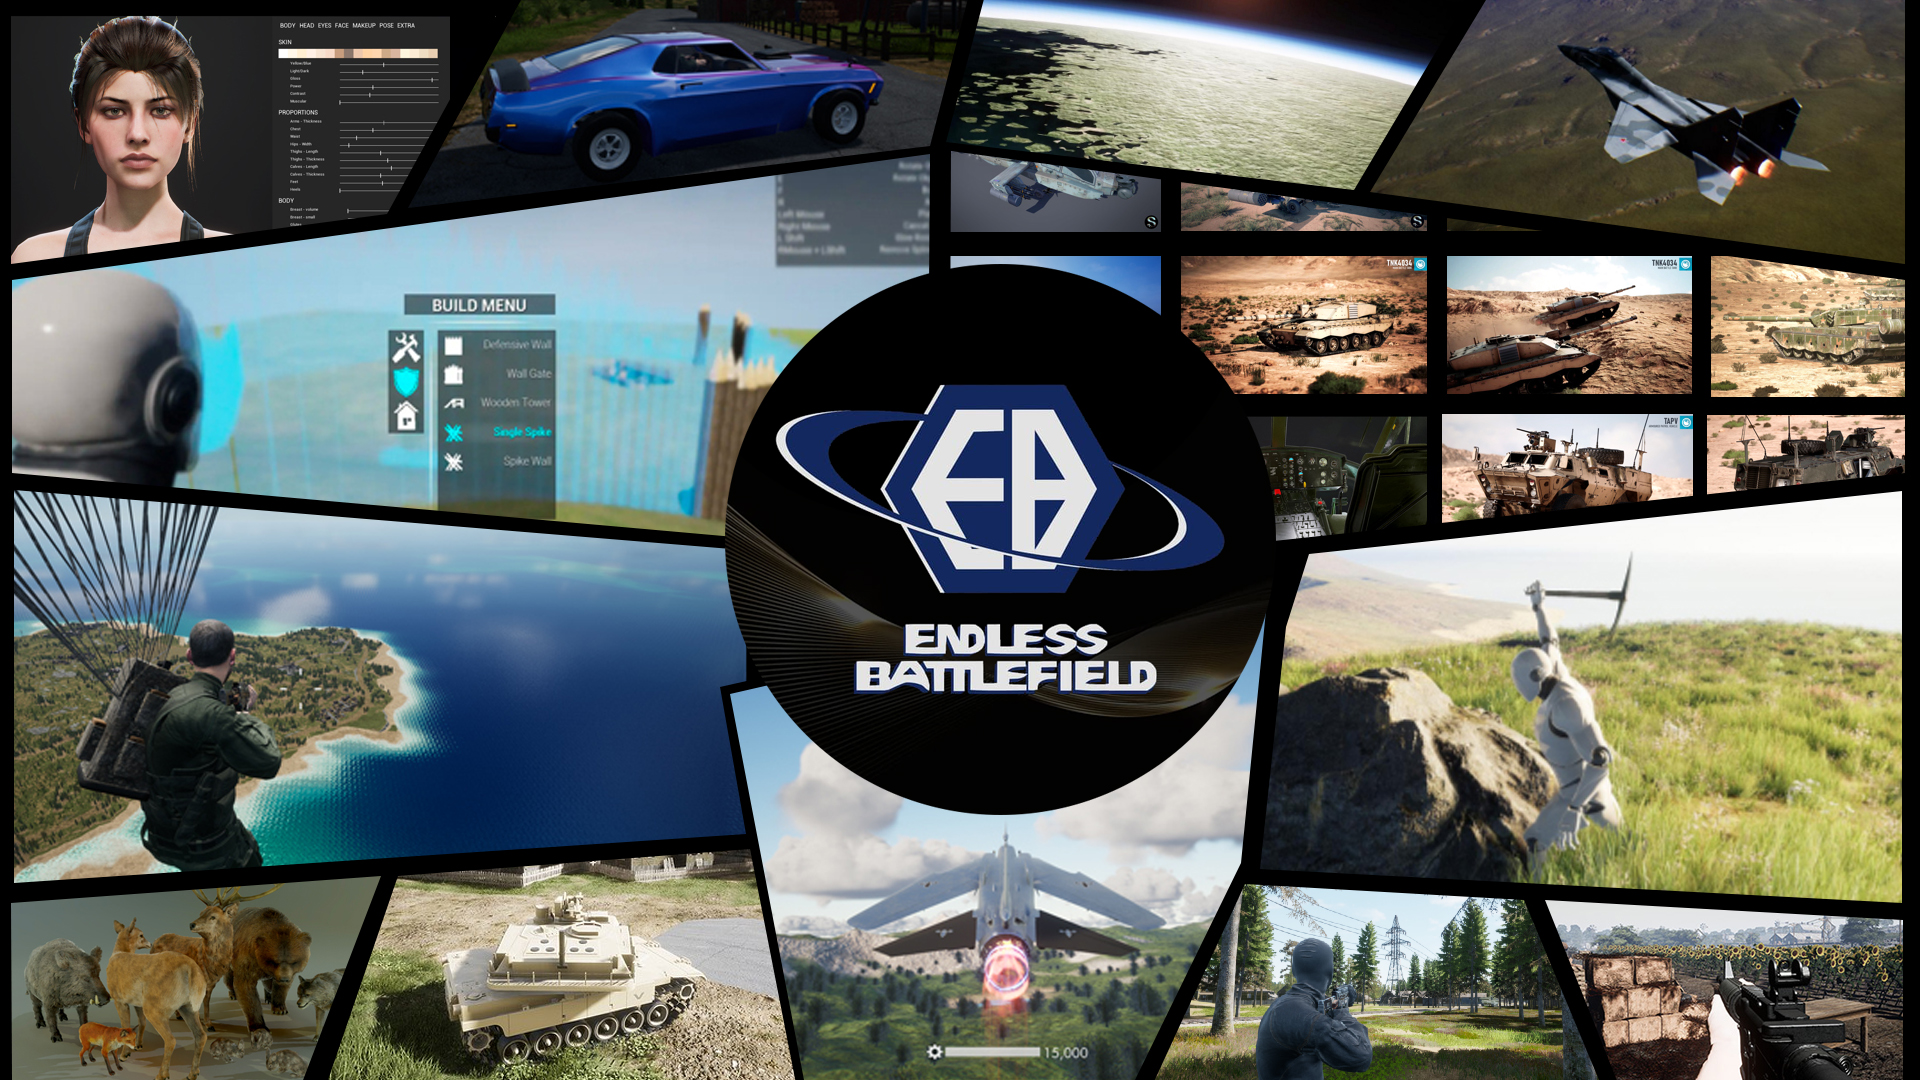 Endless Battlefield -  “The Land For Smart Money” is set to launch on Infinite Launch